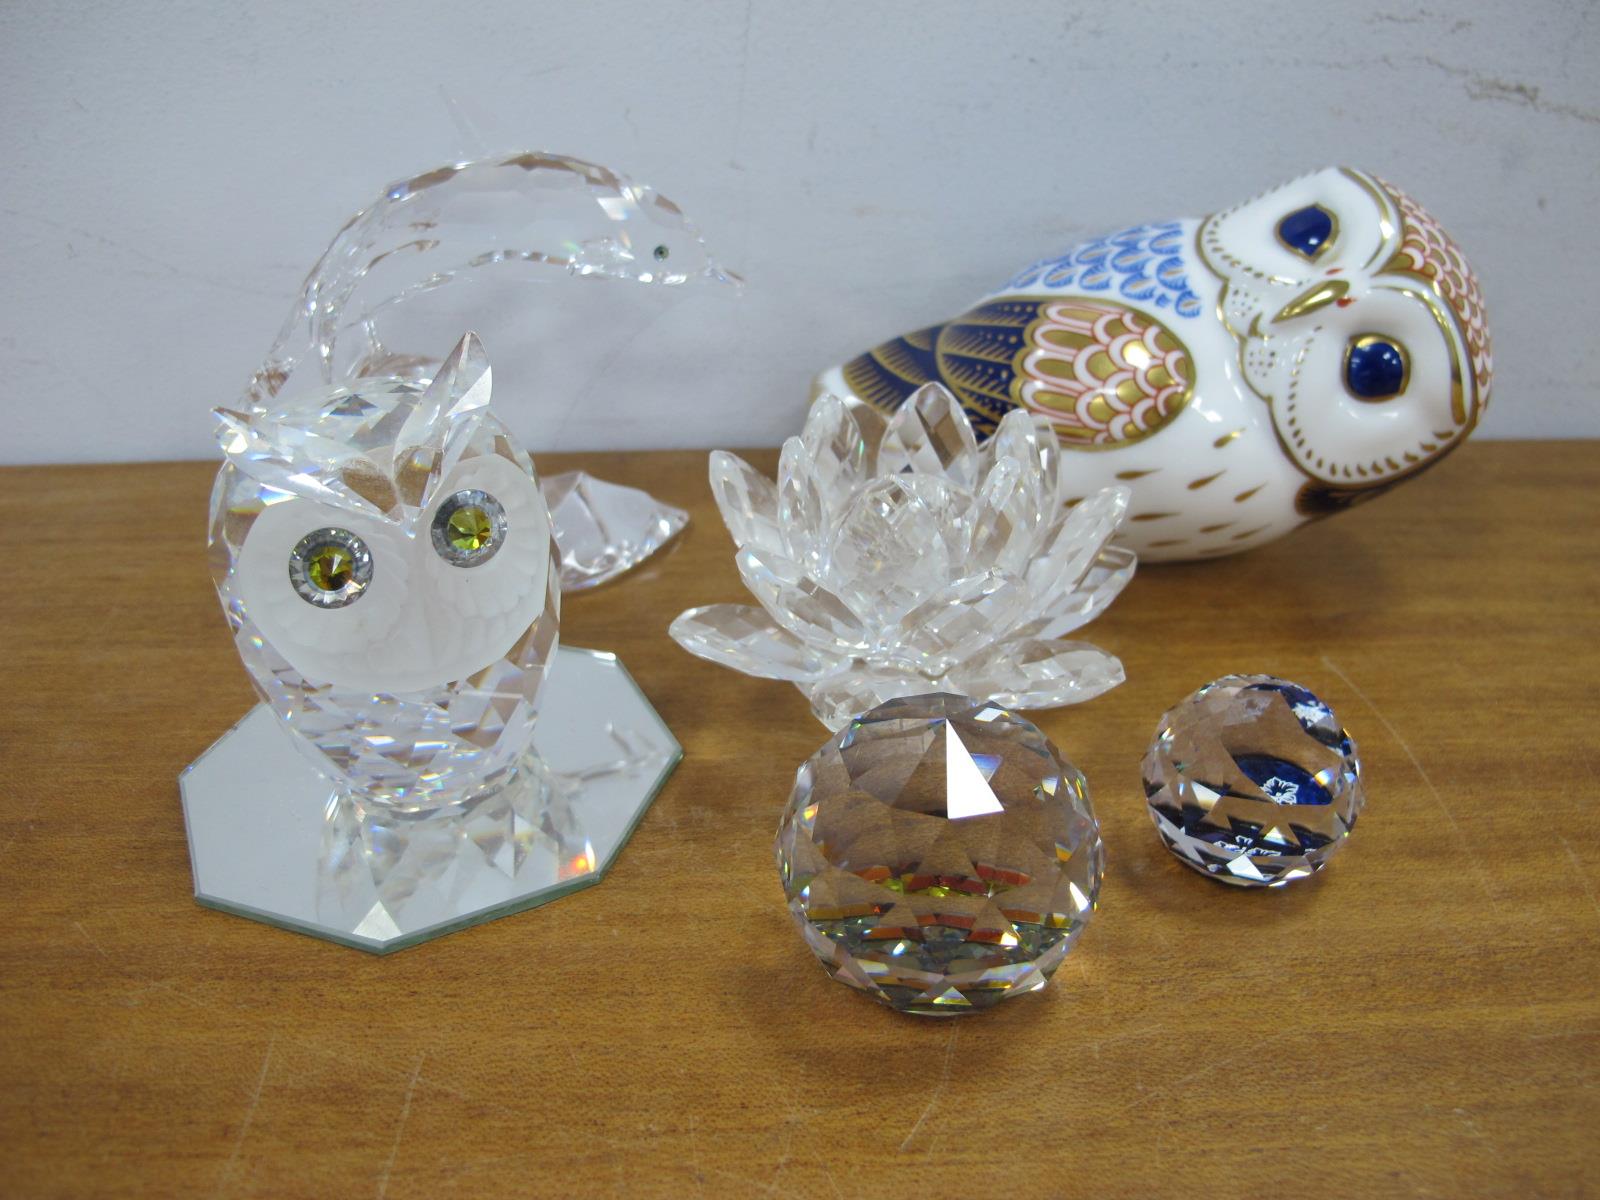 Swarovski Glass Figures, owl, dolphin, flower head, Royal Crown Derby paperweight of an owl.